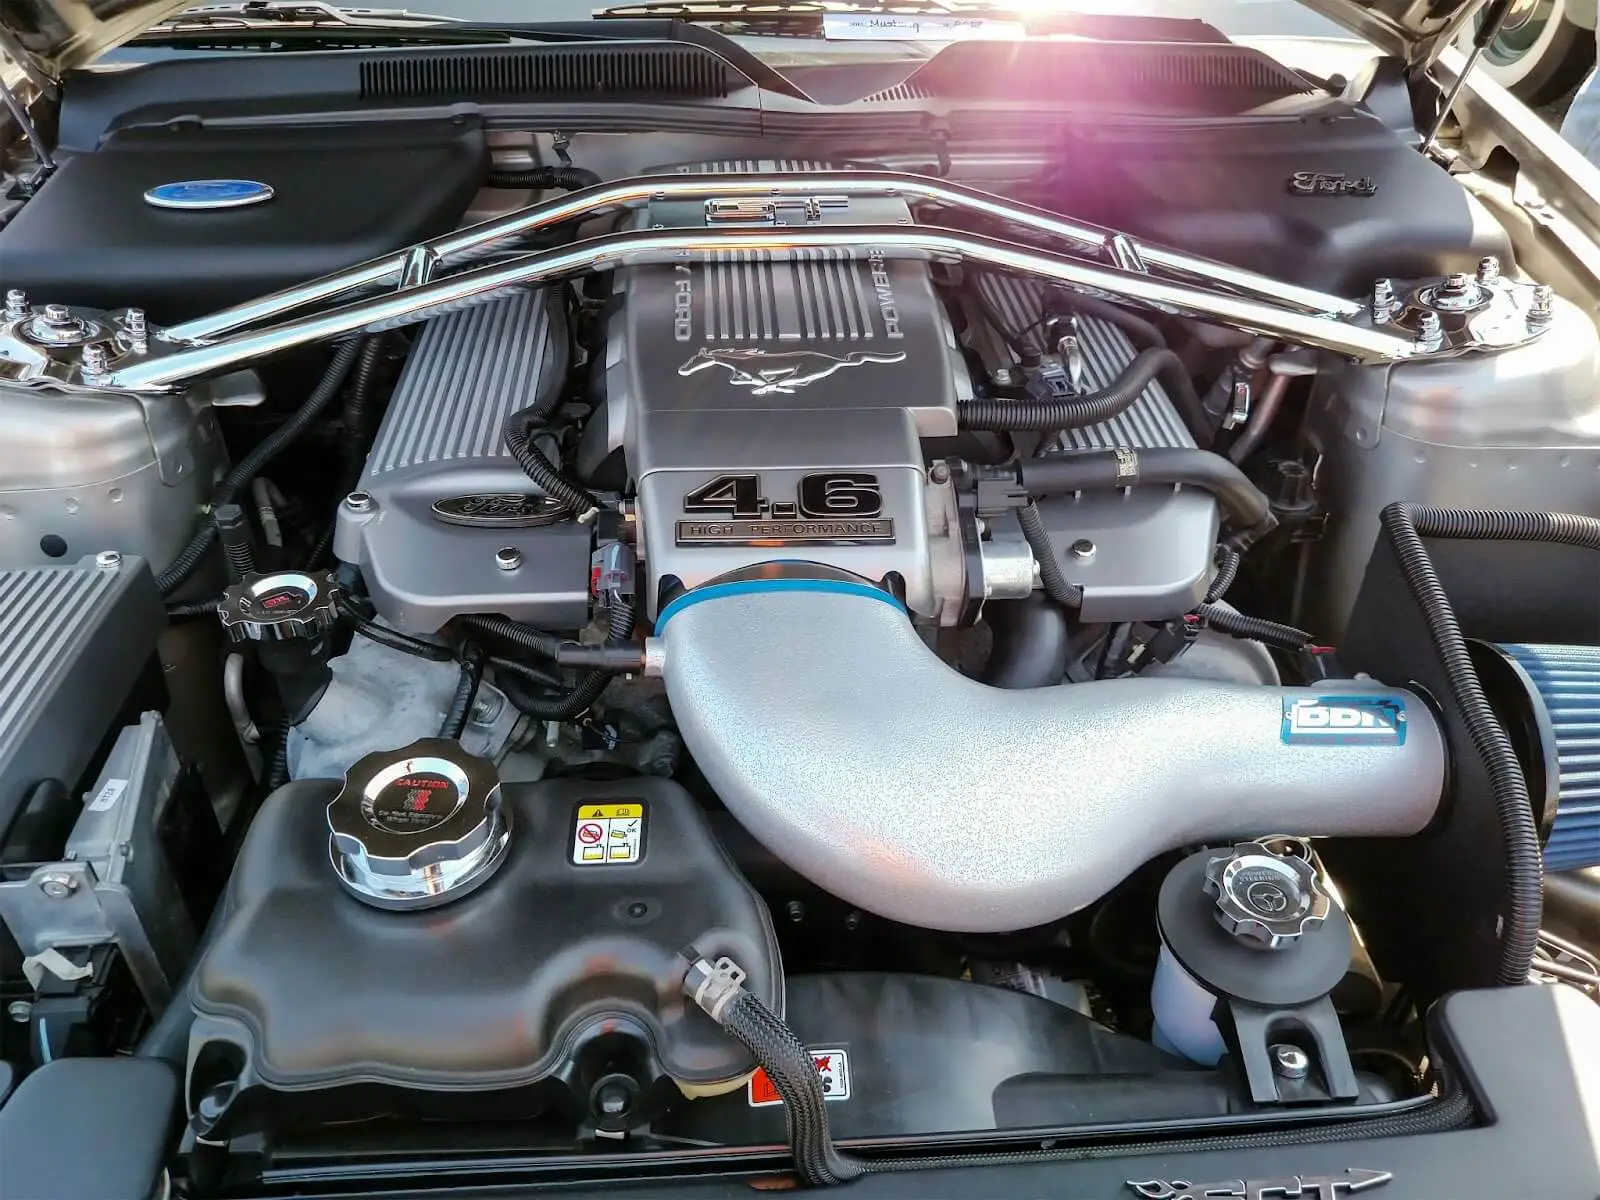 Overview & Specs Of The 4.6 Ford Engine